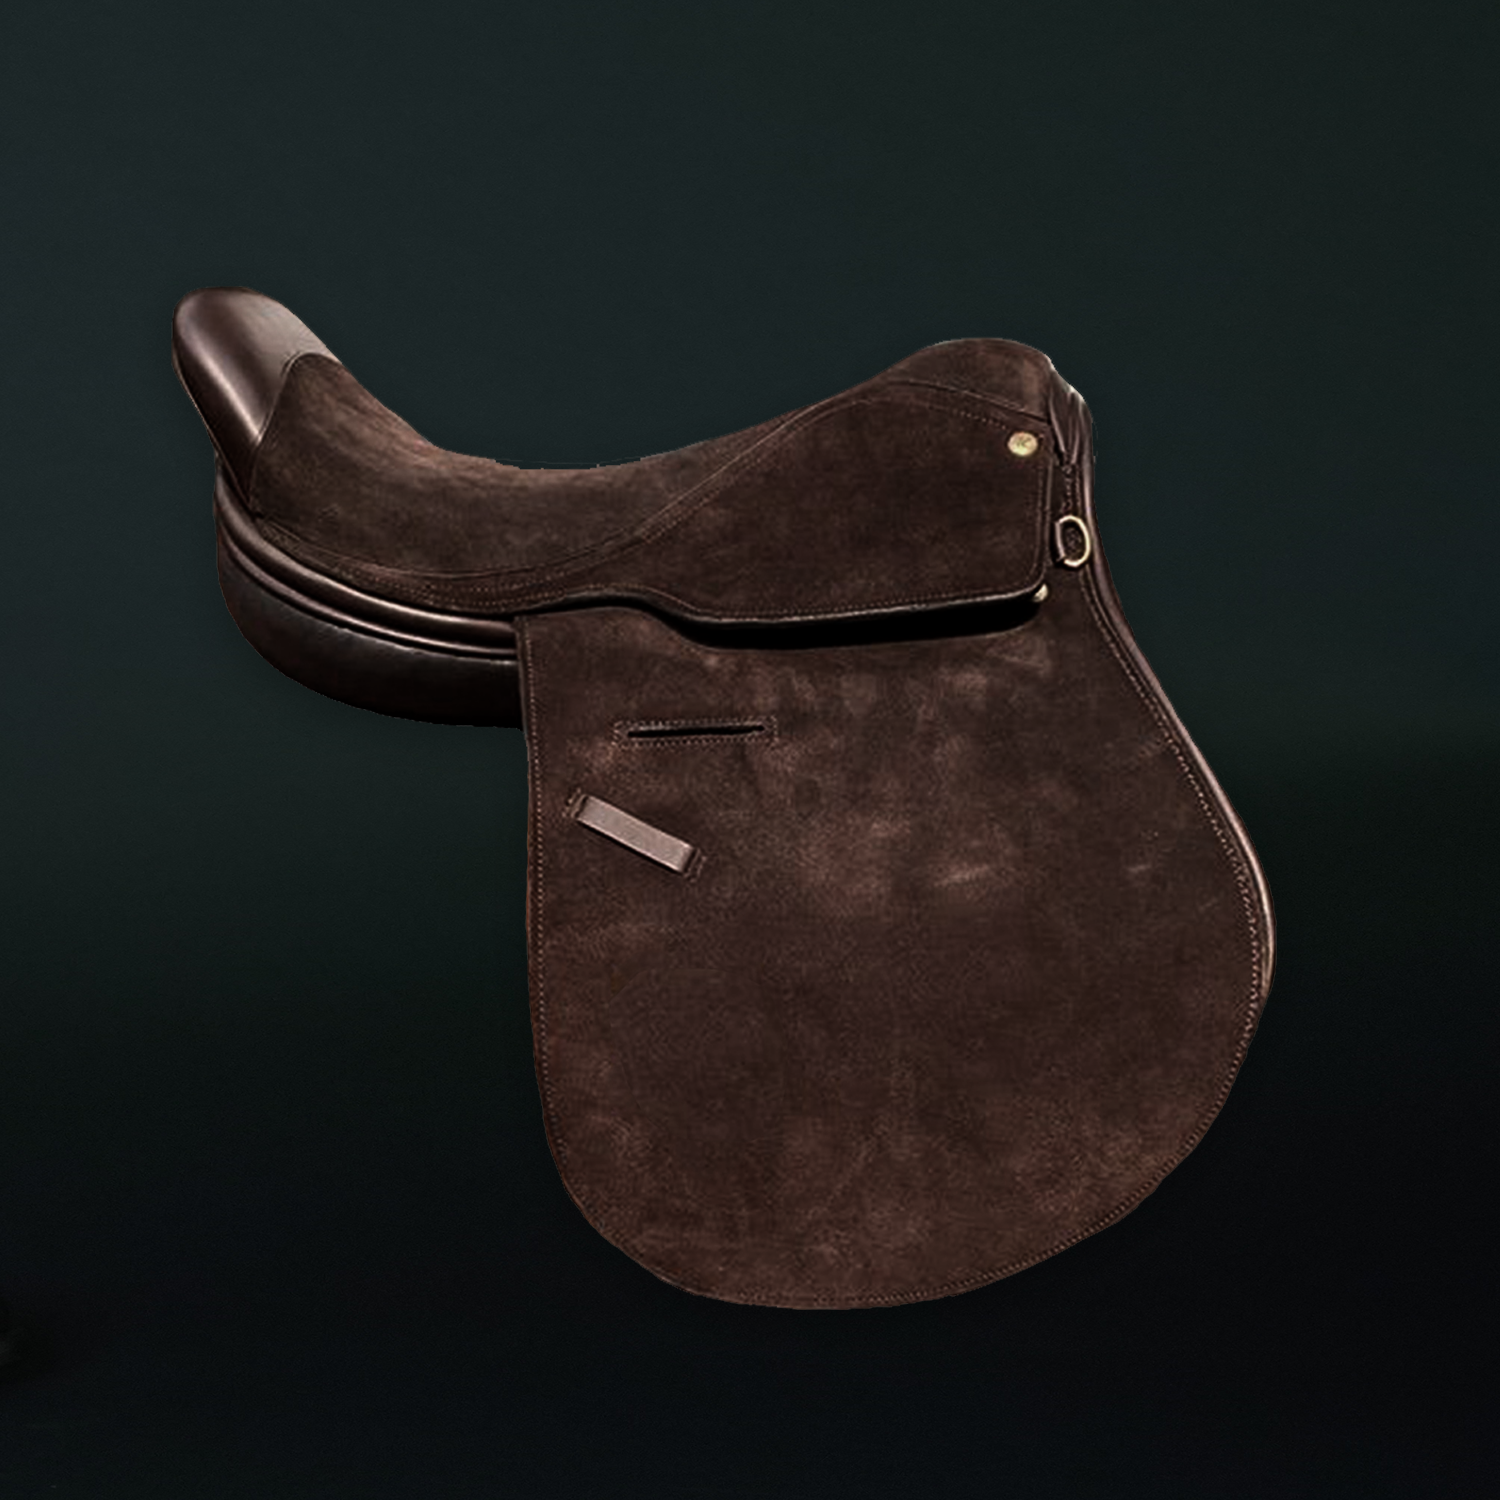 S&K Players Polo Suede Saddle